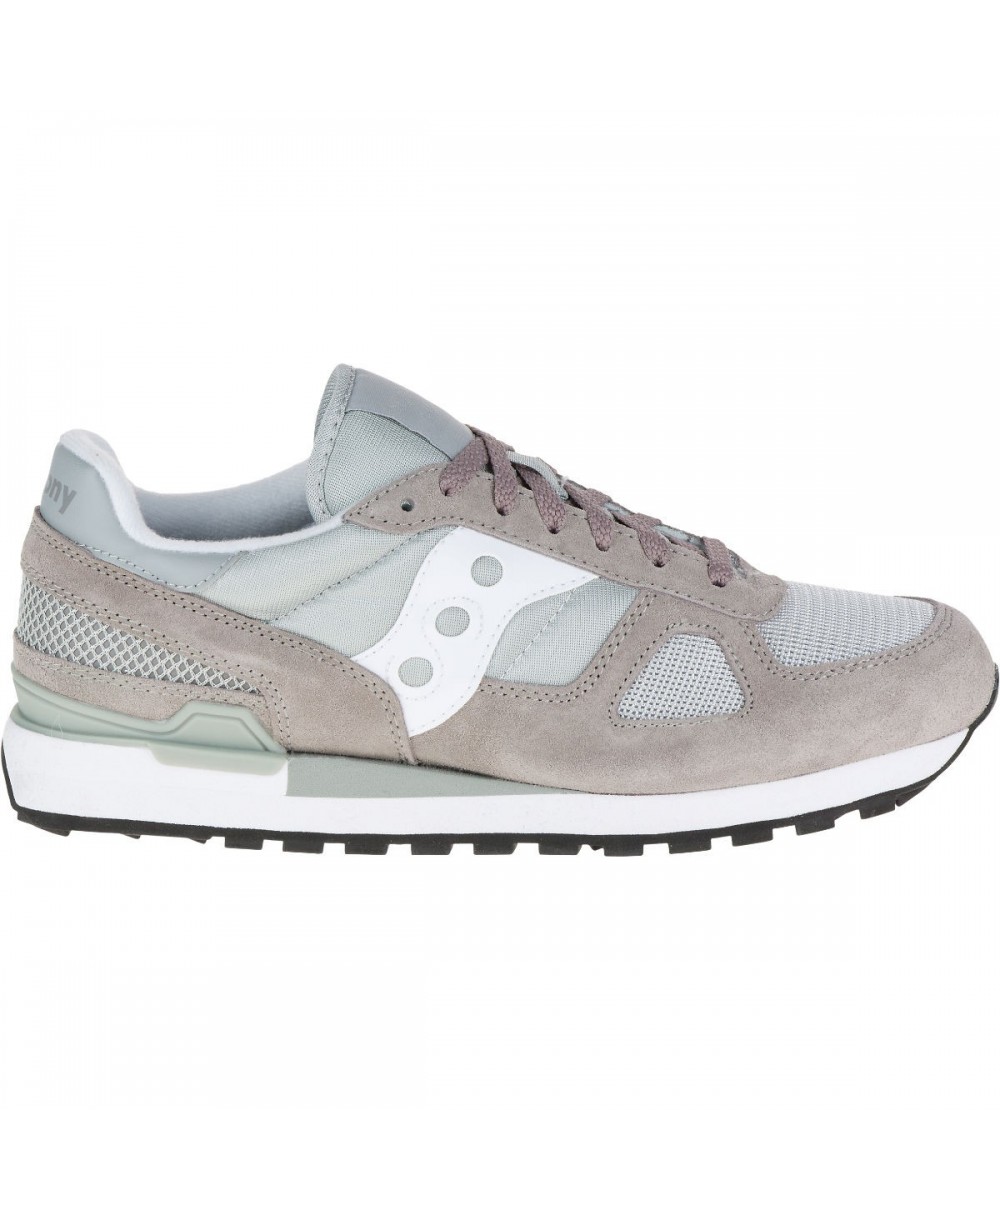 saucony chaussures homme 2018